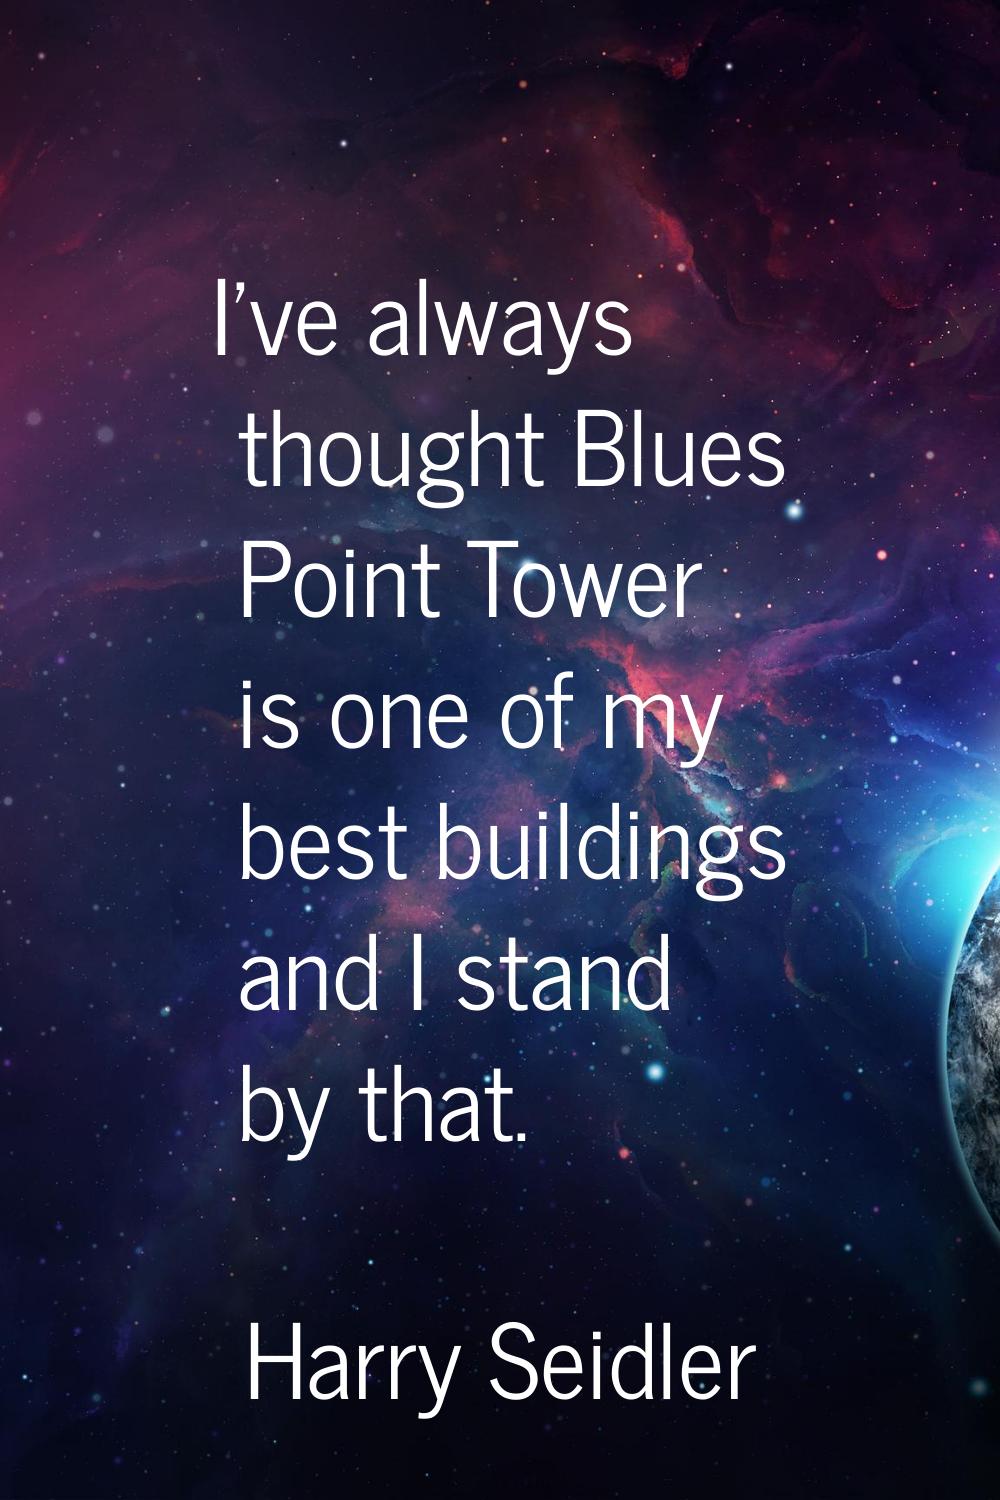 I've always thought Blues Point Tower is one of my best buildings and I stand by that.